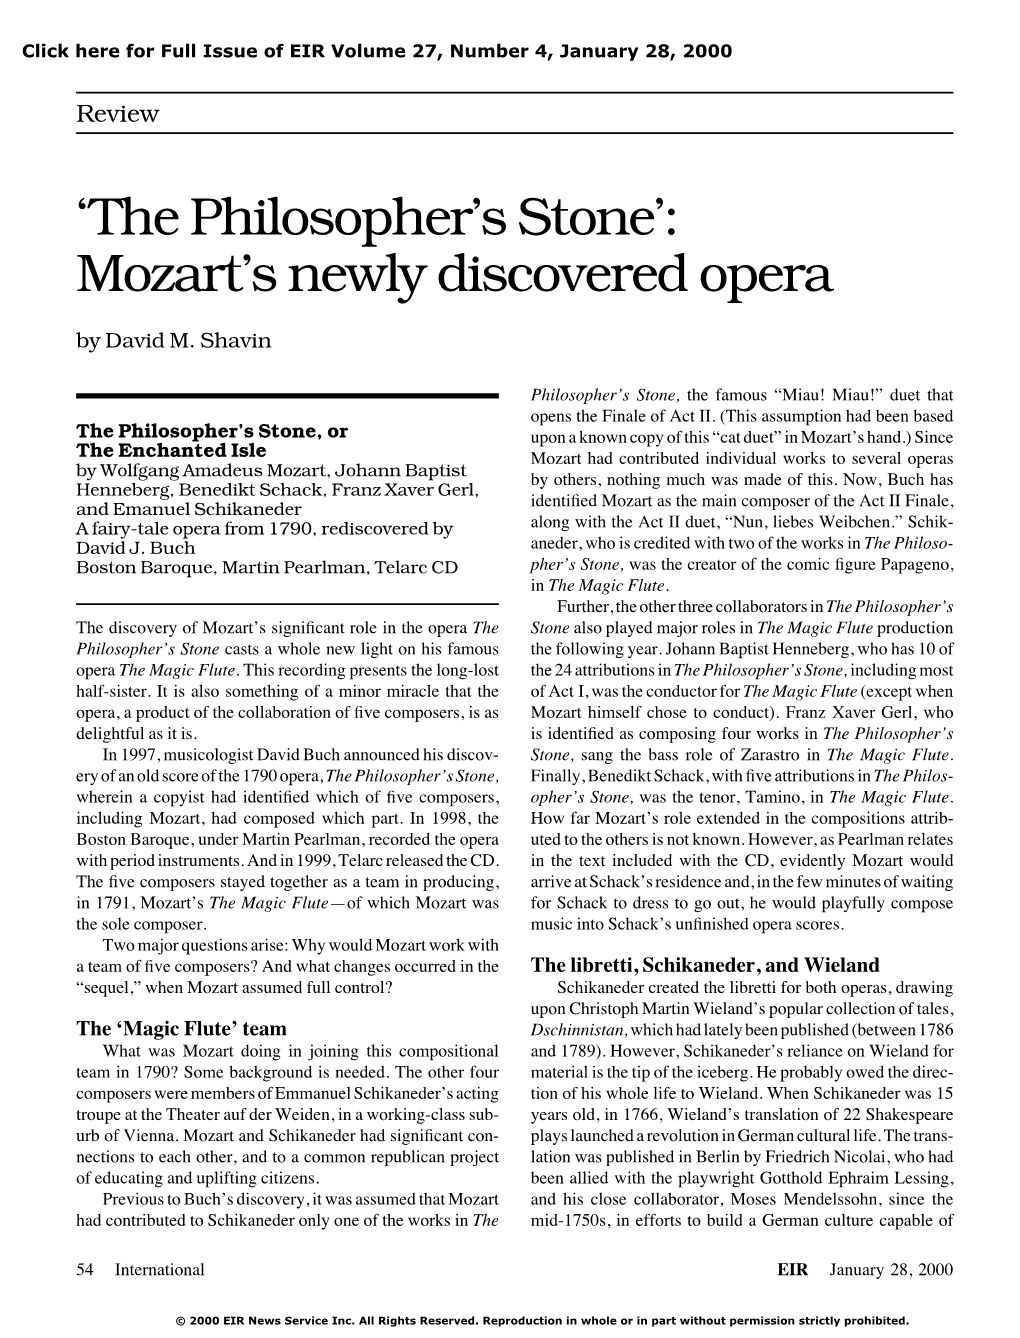 'The Philosopher's Stone': Mozart's Newly Discovered Opera